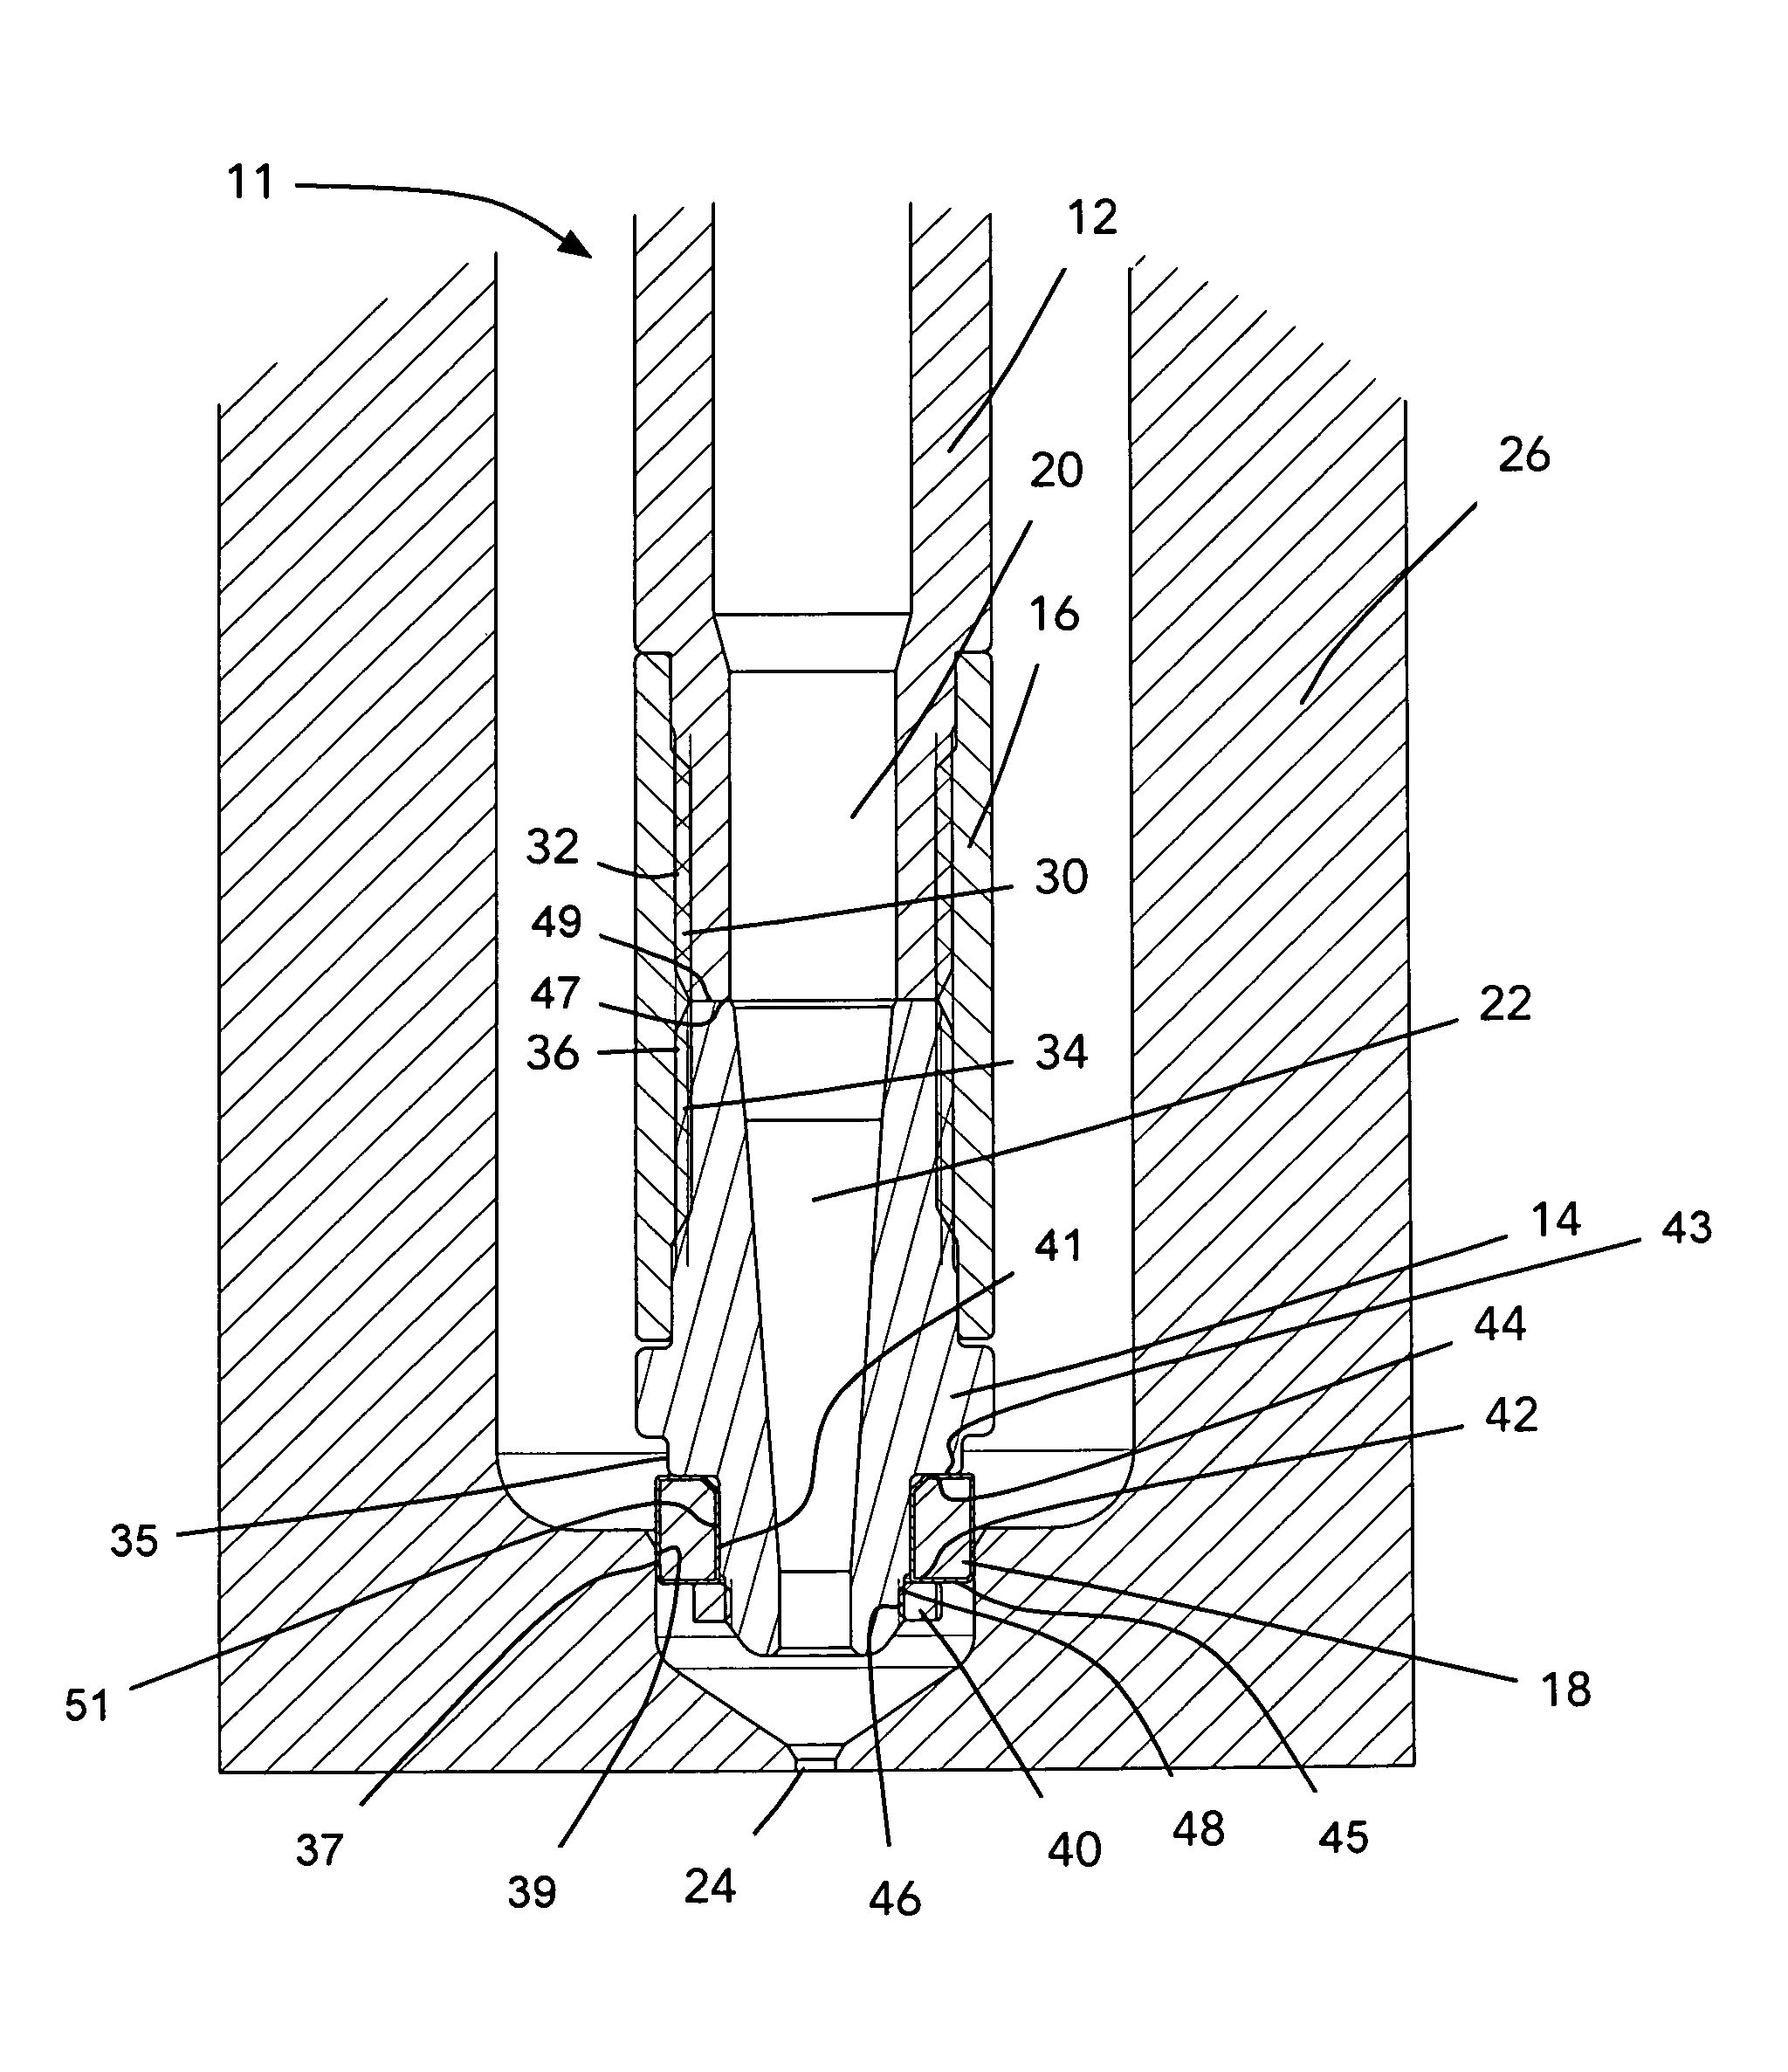 Injection nozzle with multi-piece tip portion